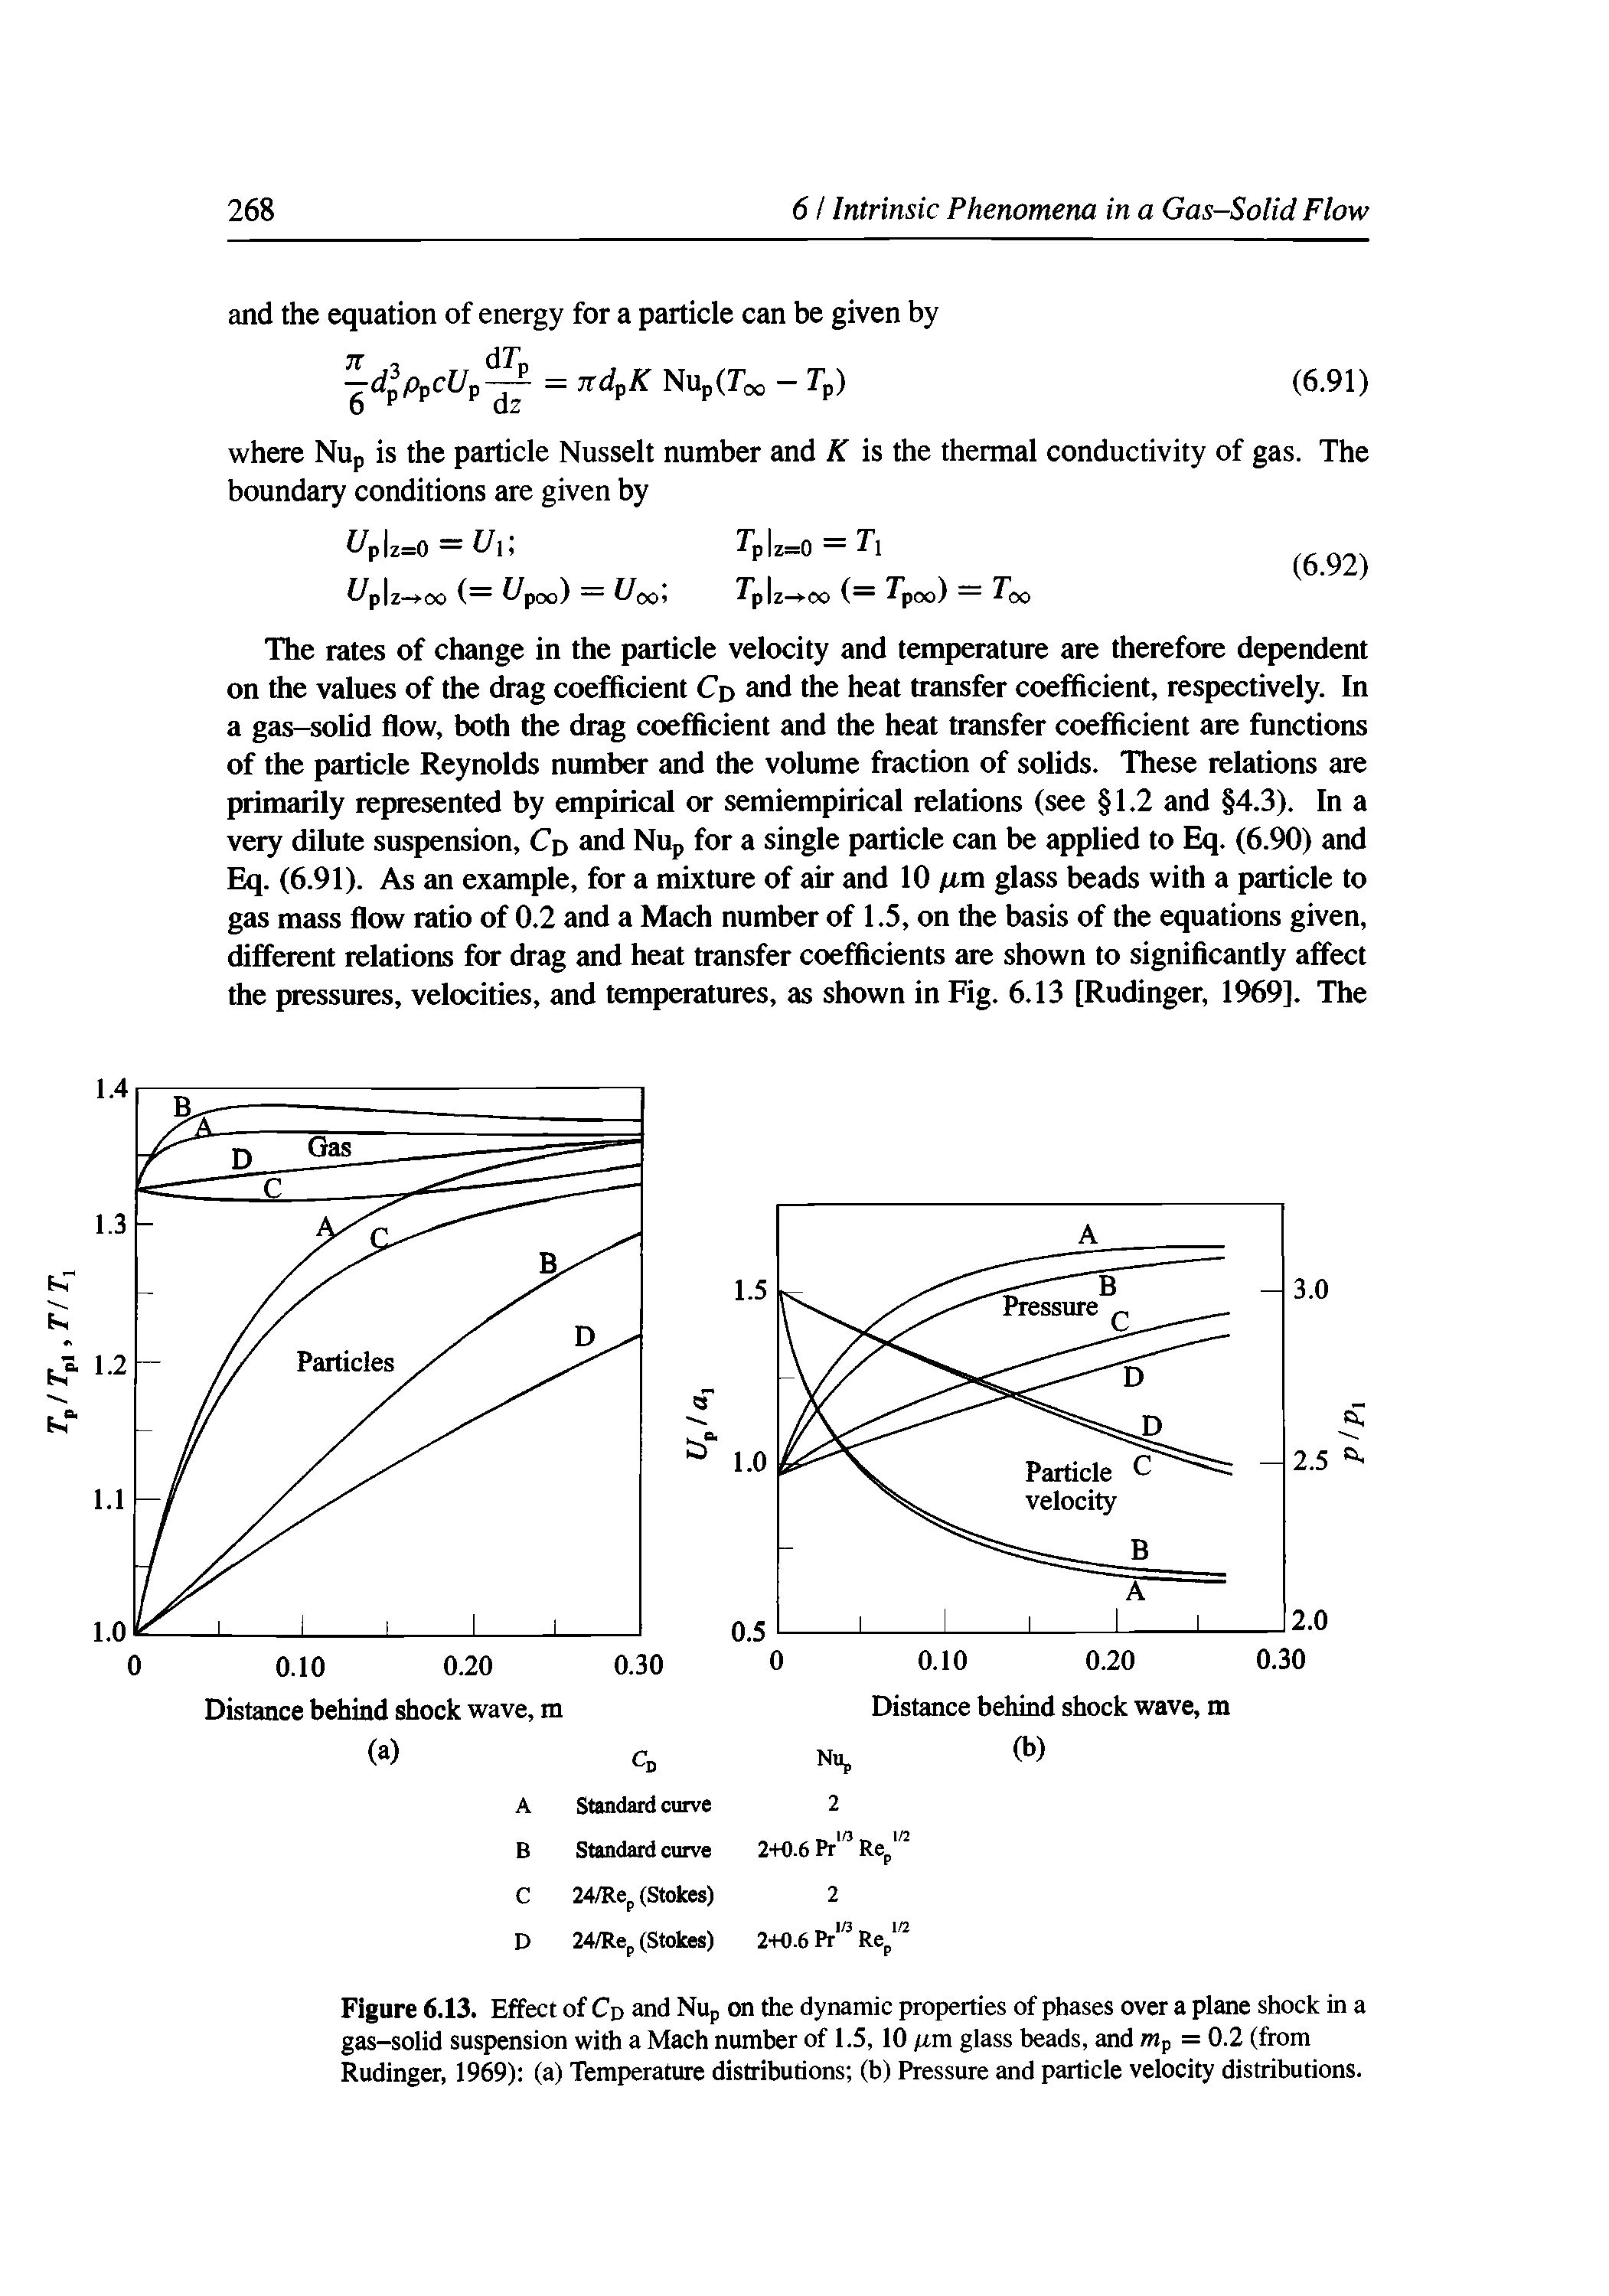 Figure 6.13. Effect of Cp and Nup on the dynamic properties of phases over a plane shock in a gas-solid suspension with a Mach number of 1.5, 10 /tm glass beads, and mp = 0.2 (from Rudinger, 1969) (a) Temperature distributions (b) Pressure and particle velocity distributions.